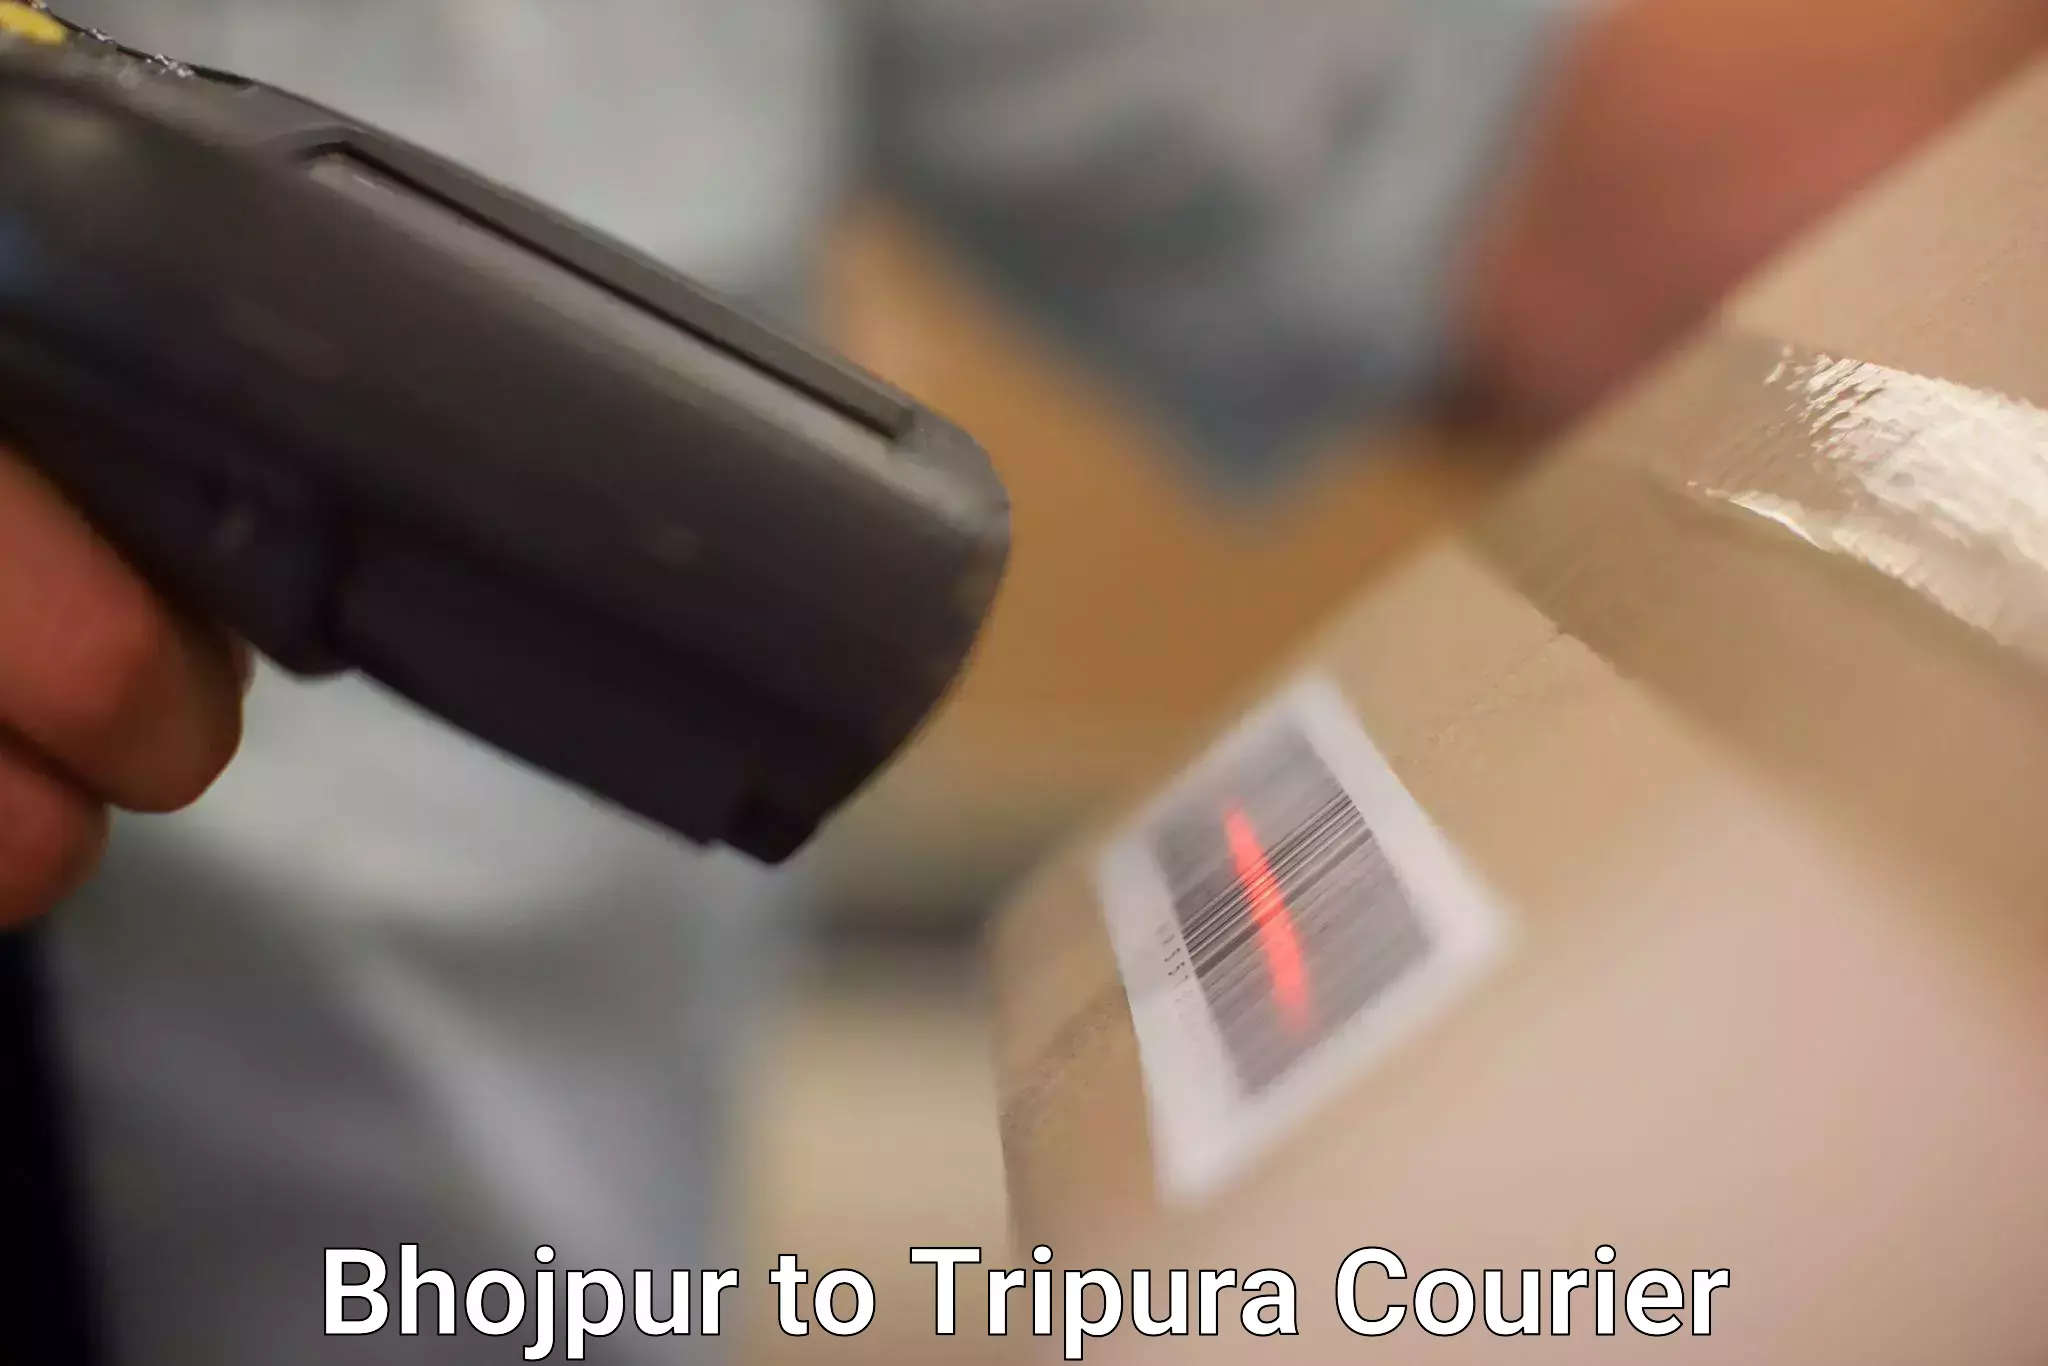 Cargo delivery service Bhojpur to Udaipur Tripura